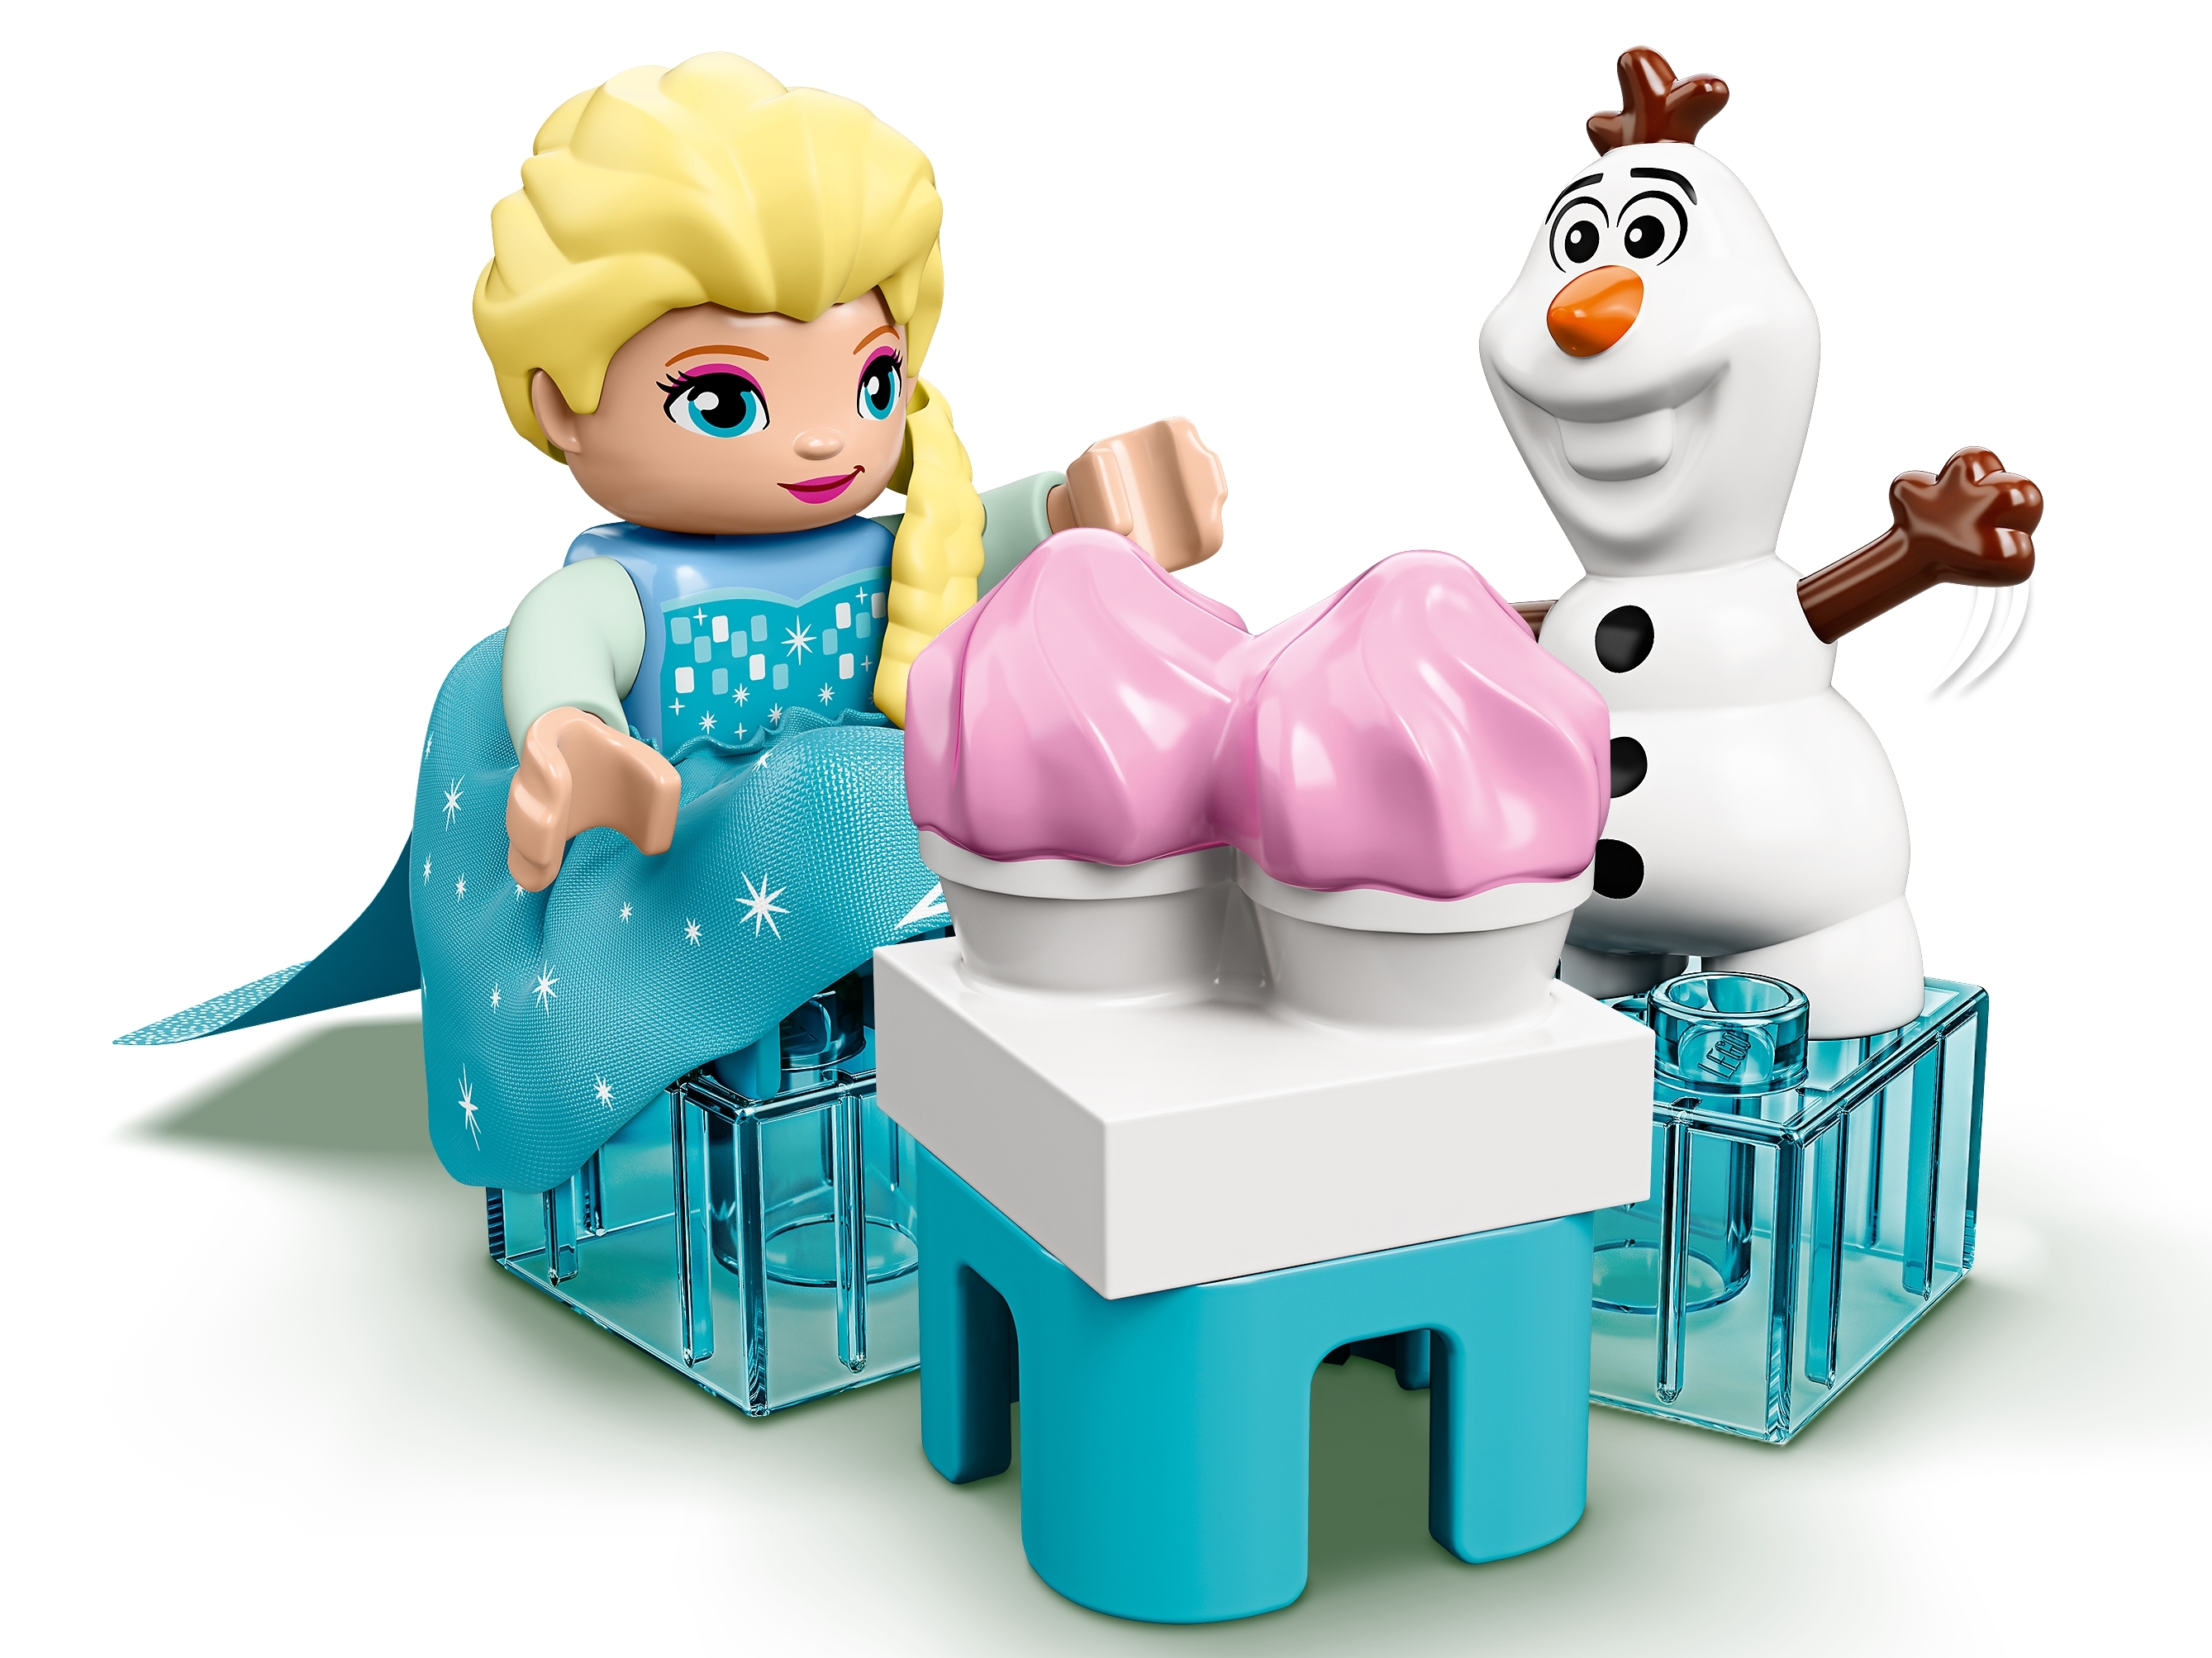 LEGO DUPLO Disney Frozen Toy Featuring Elsa and Olafs Tea Party 10920 Disney Frozen Gift for Kids and Toddlers New 2020 17 Pieces